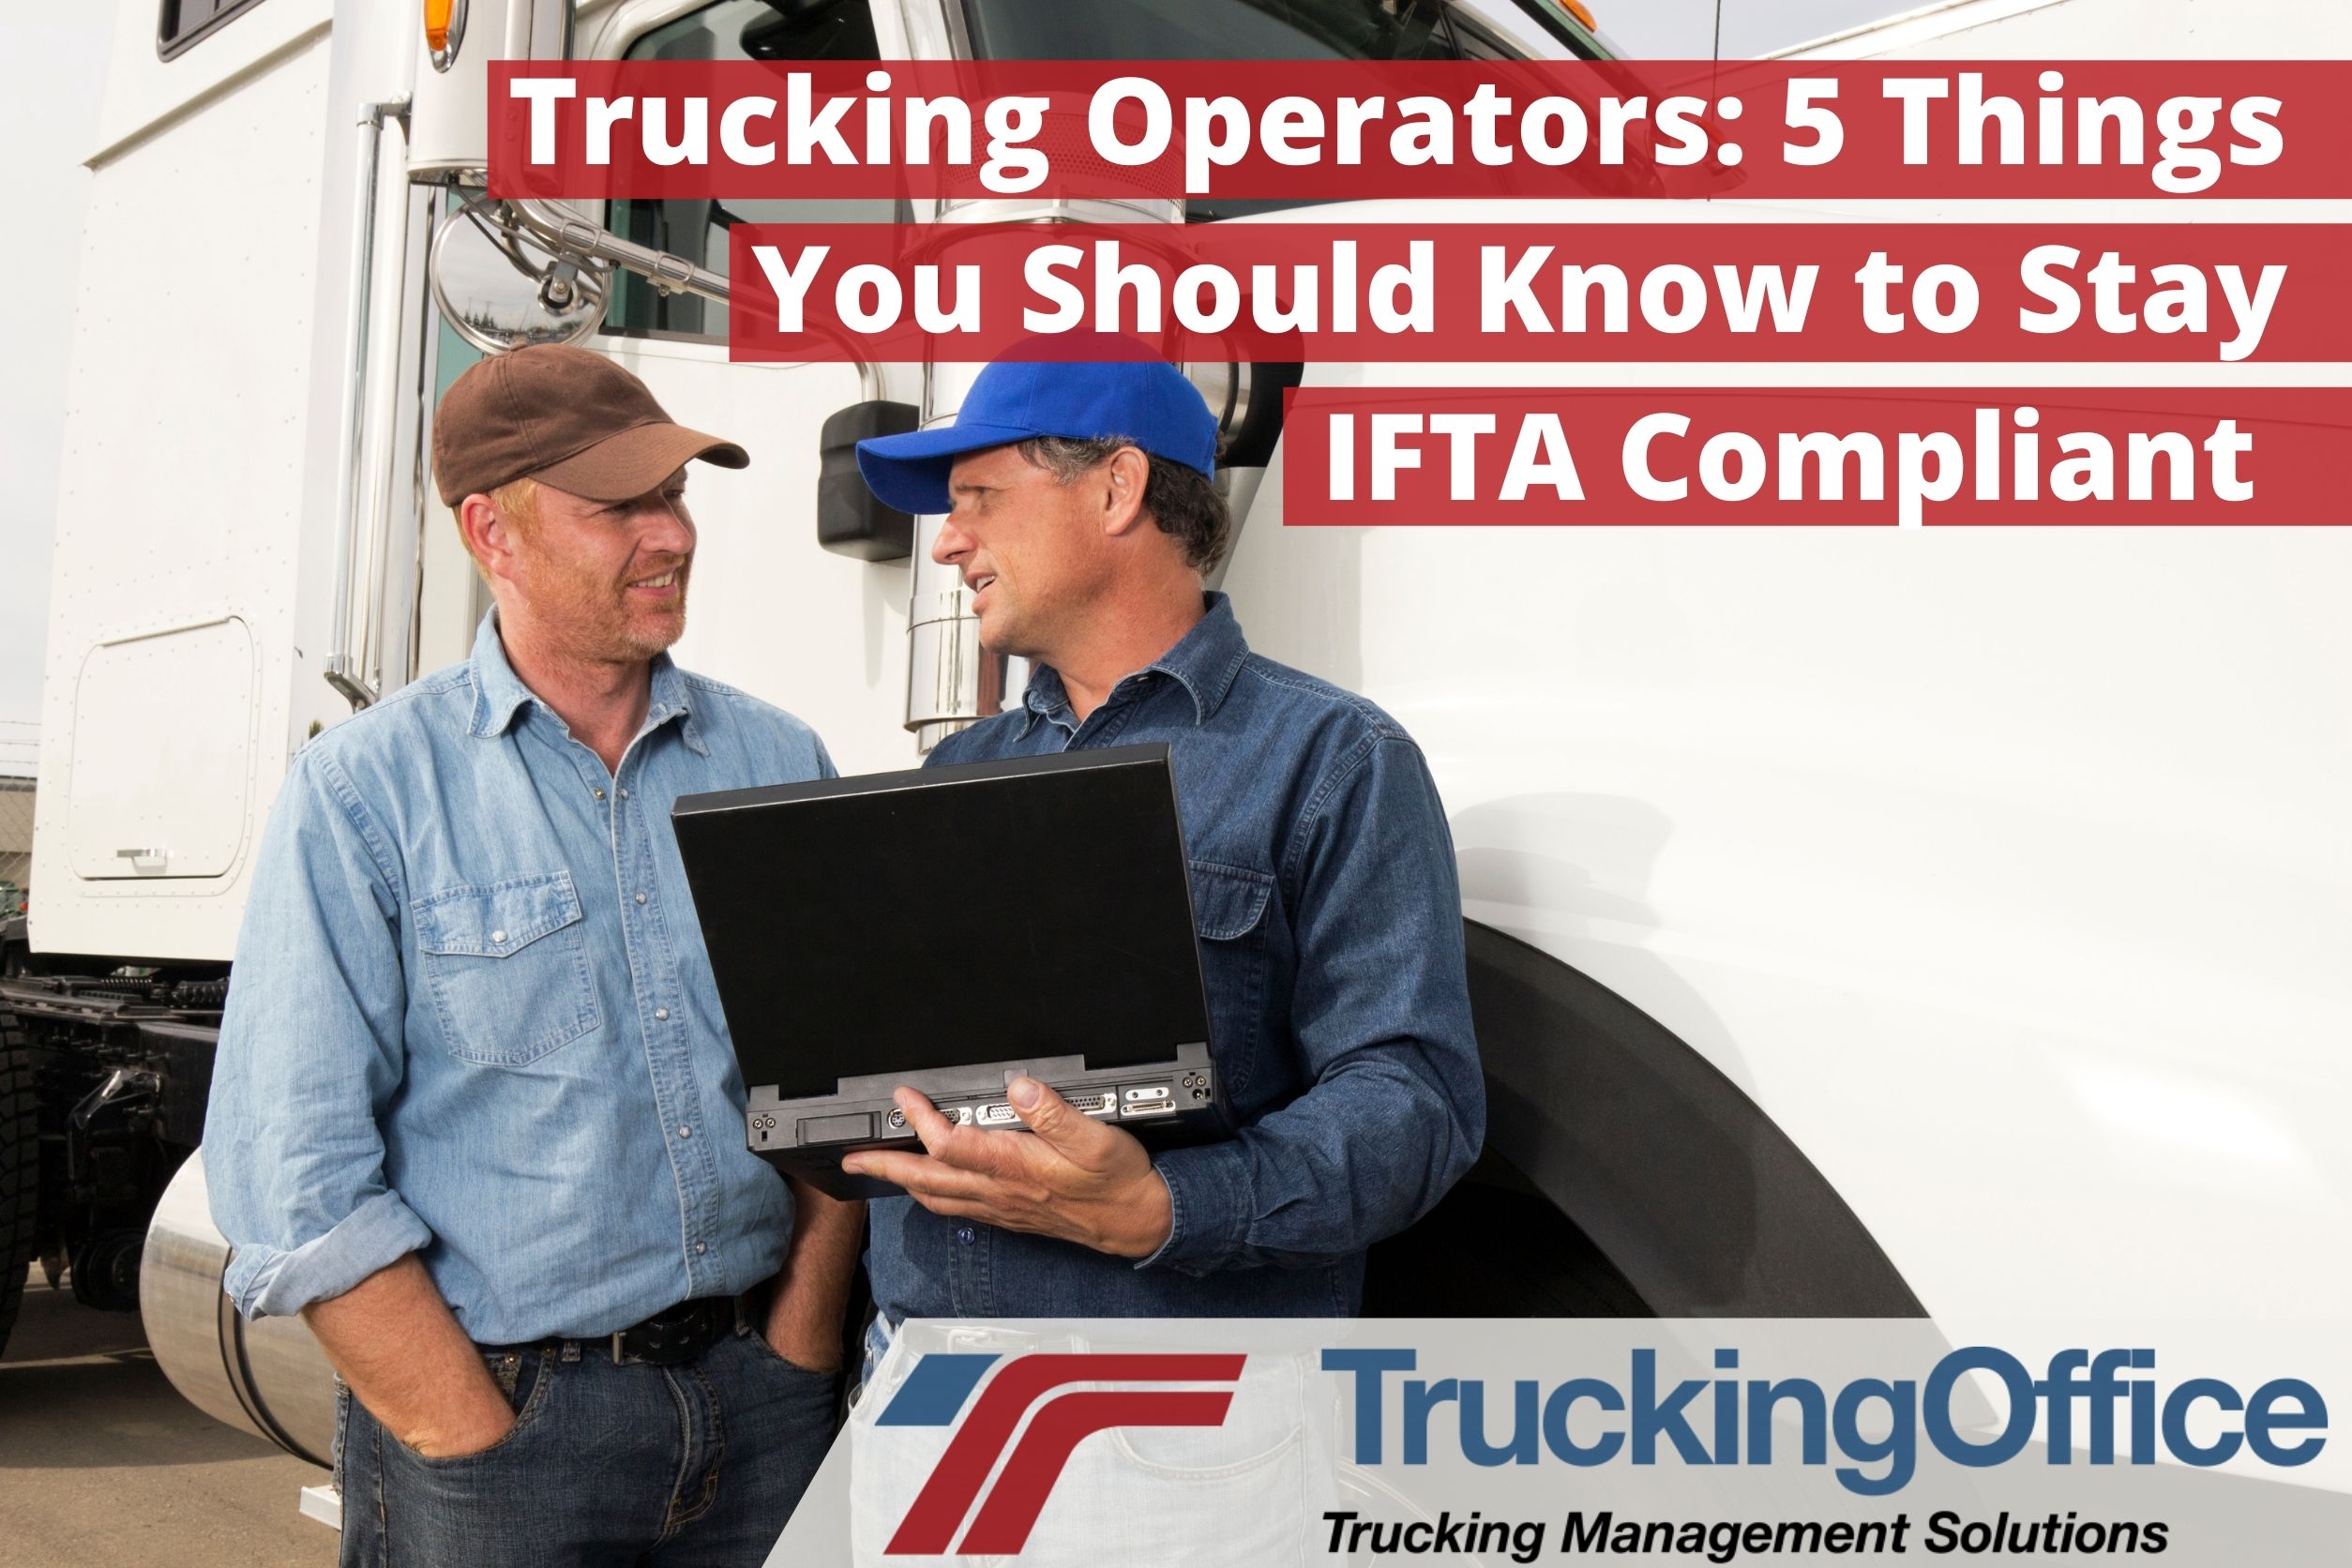 Trucking Operators: 5 Things You Should Know to Stay IFTA Compliant